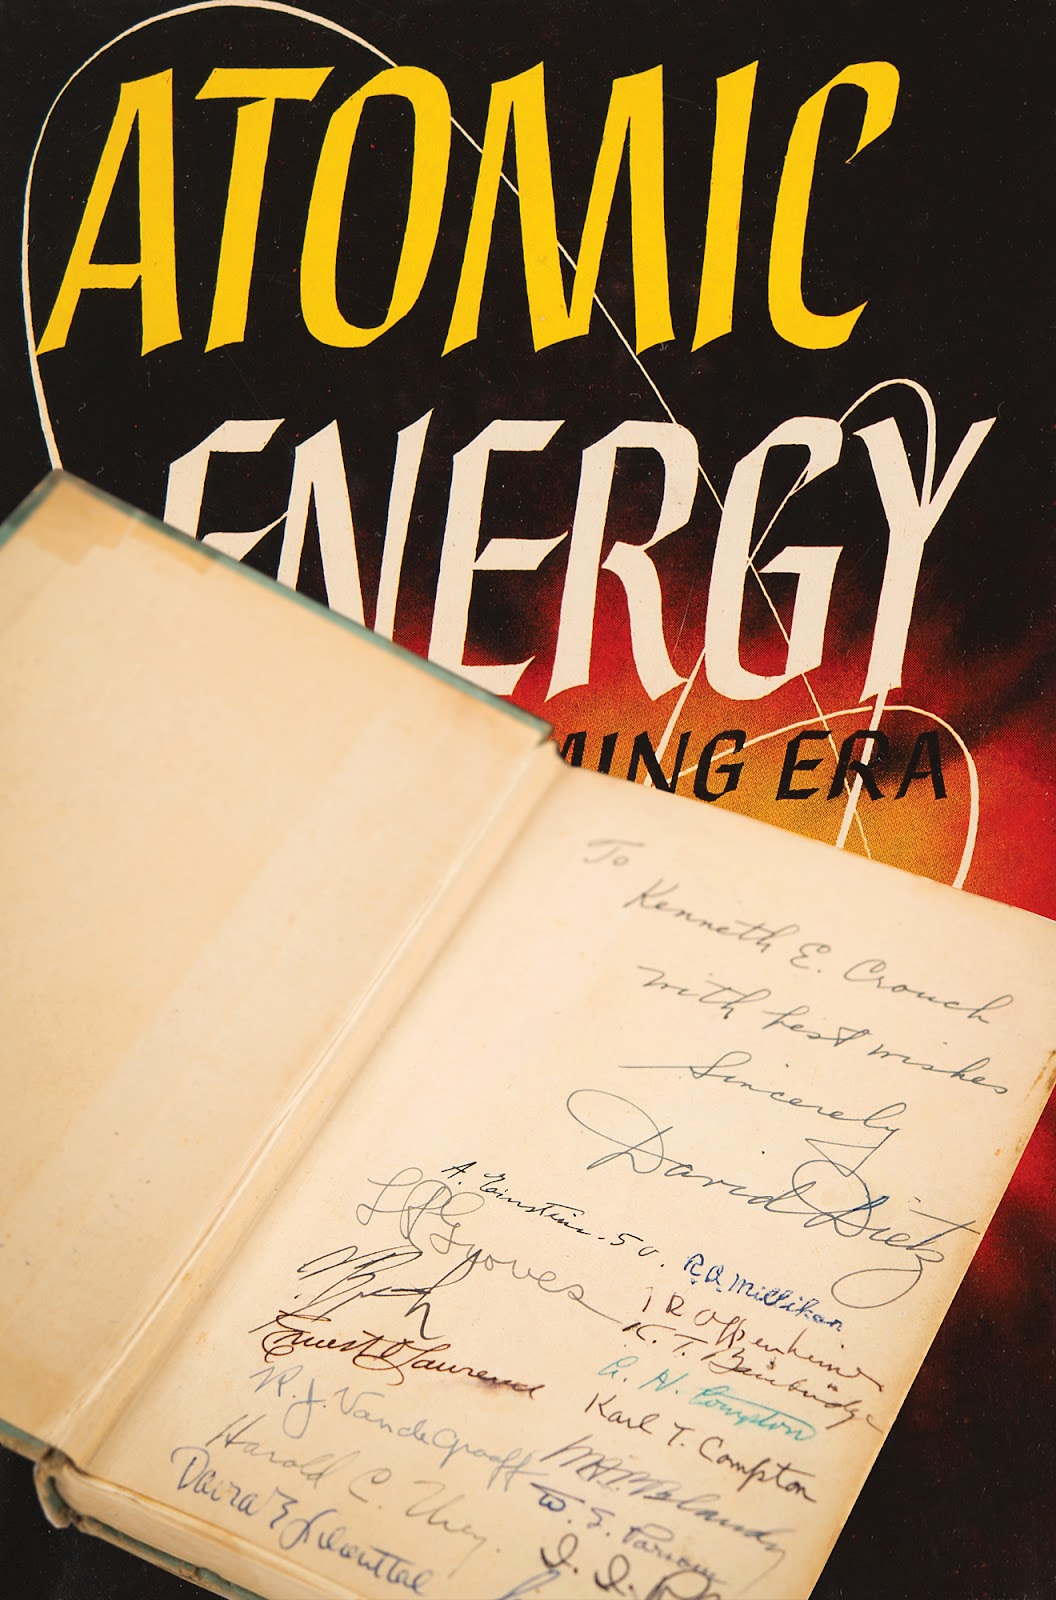 A copy of Atomic Energy in the Coming Era by David Dietz signed by major players of the Manhattan Project.